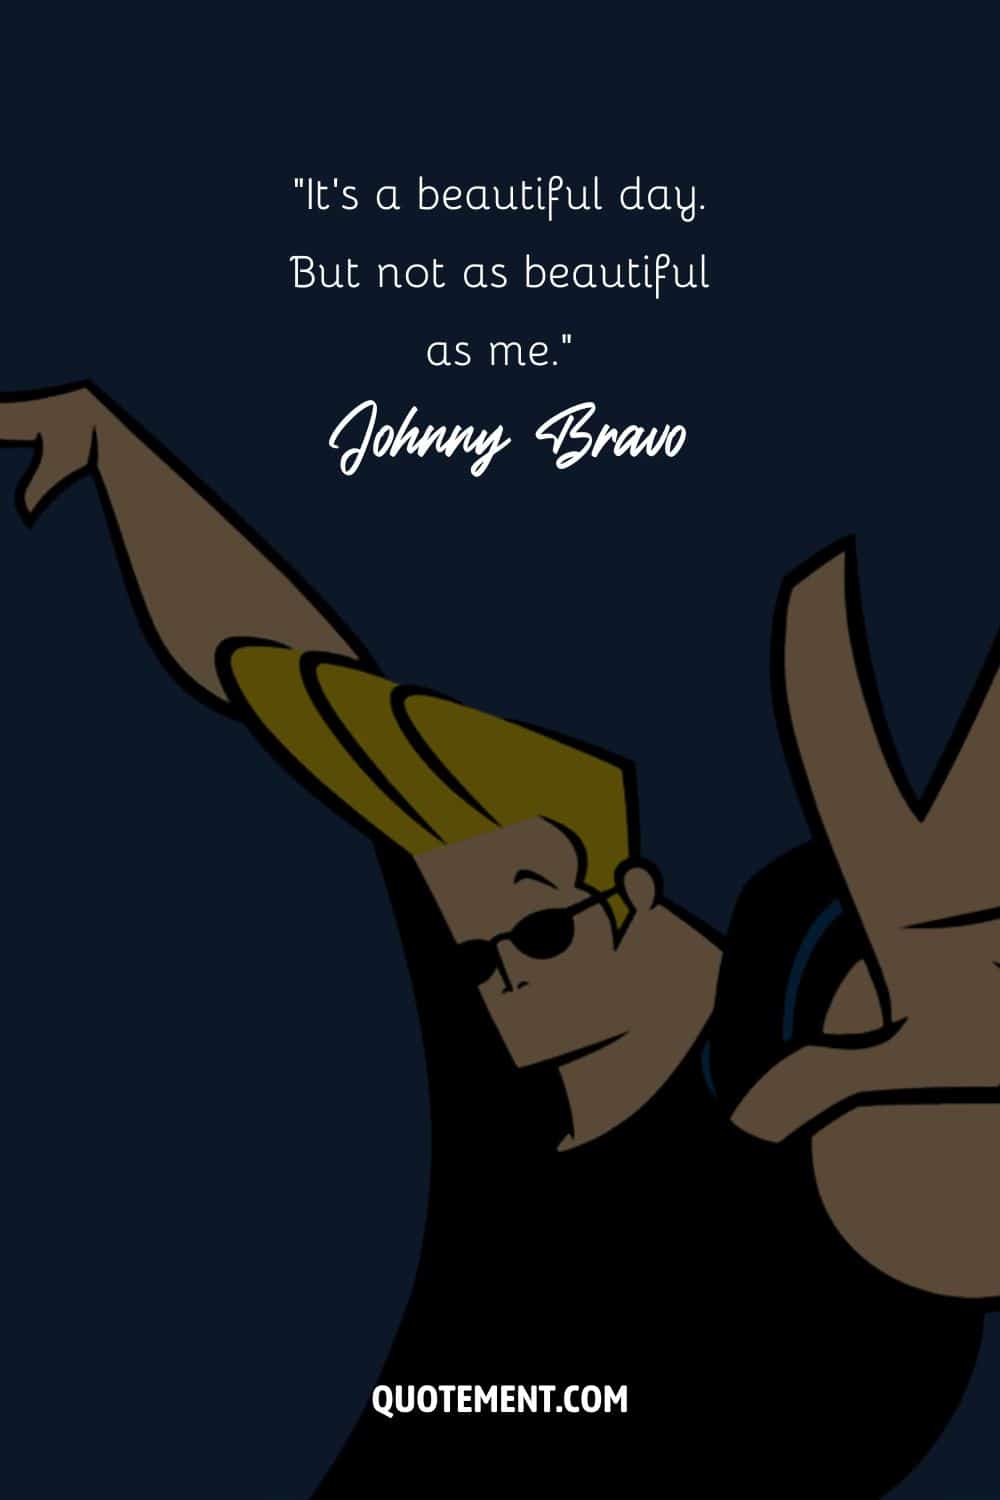 Johnny Bravo making his moves with hands
